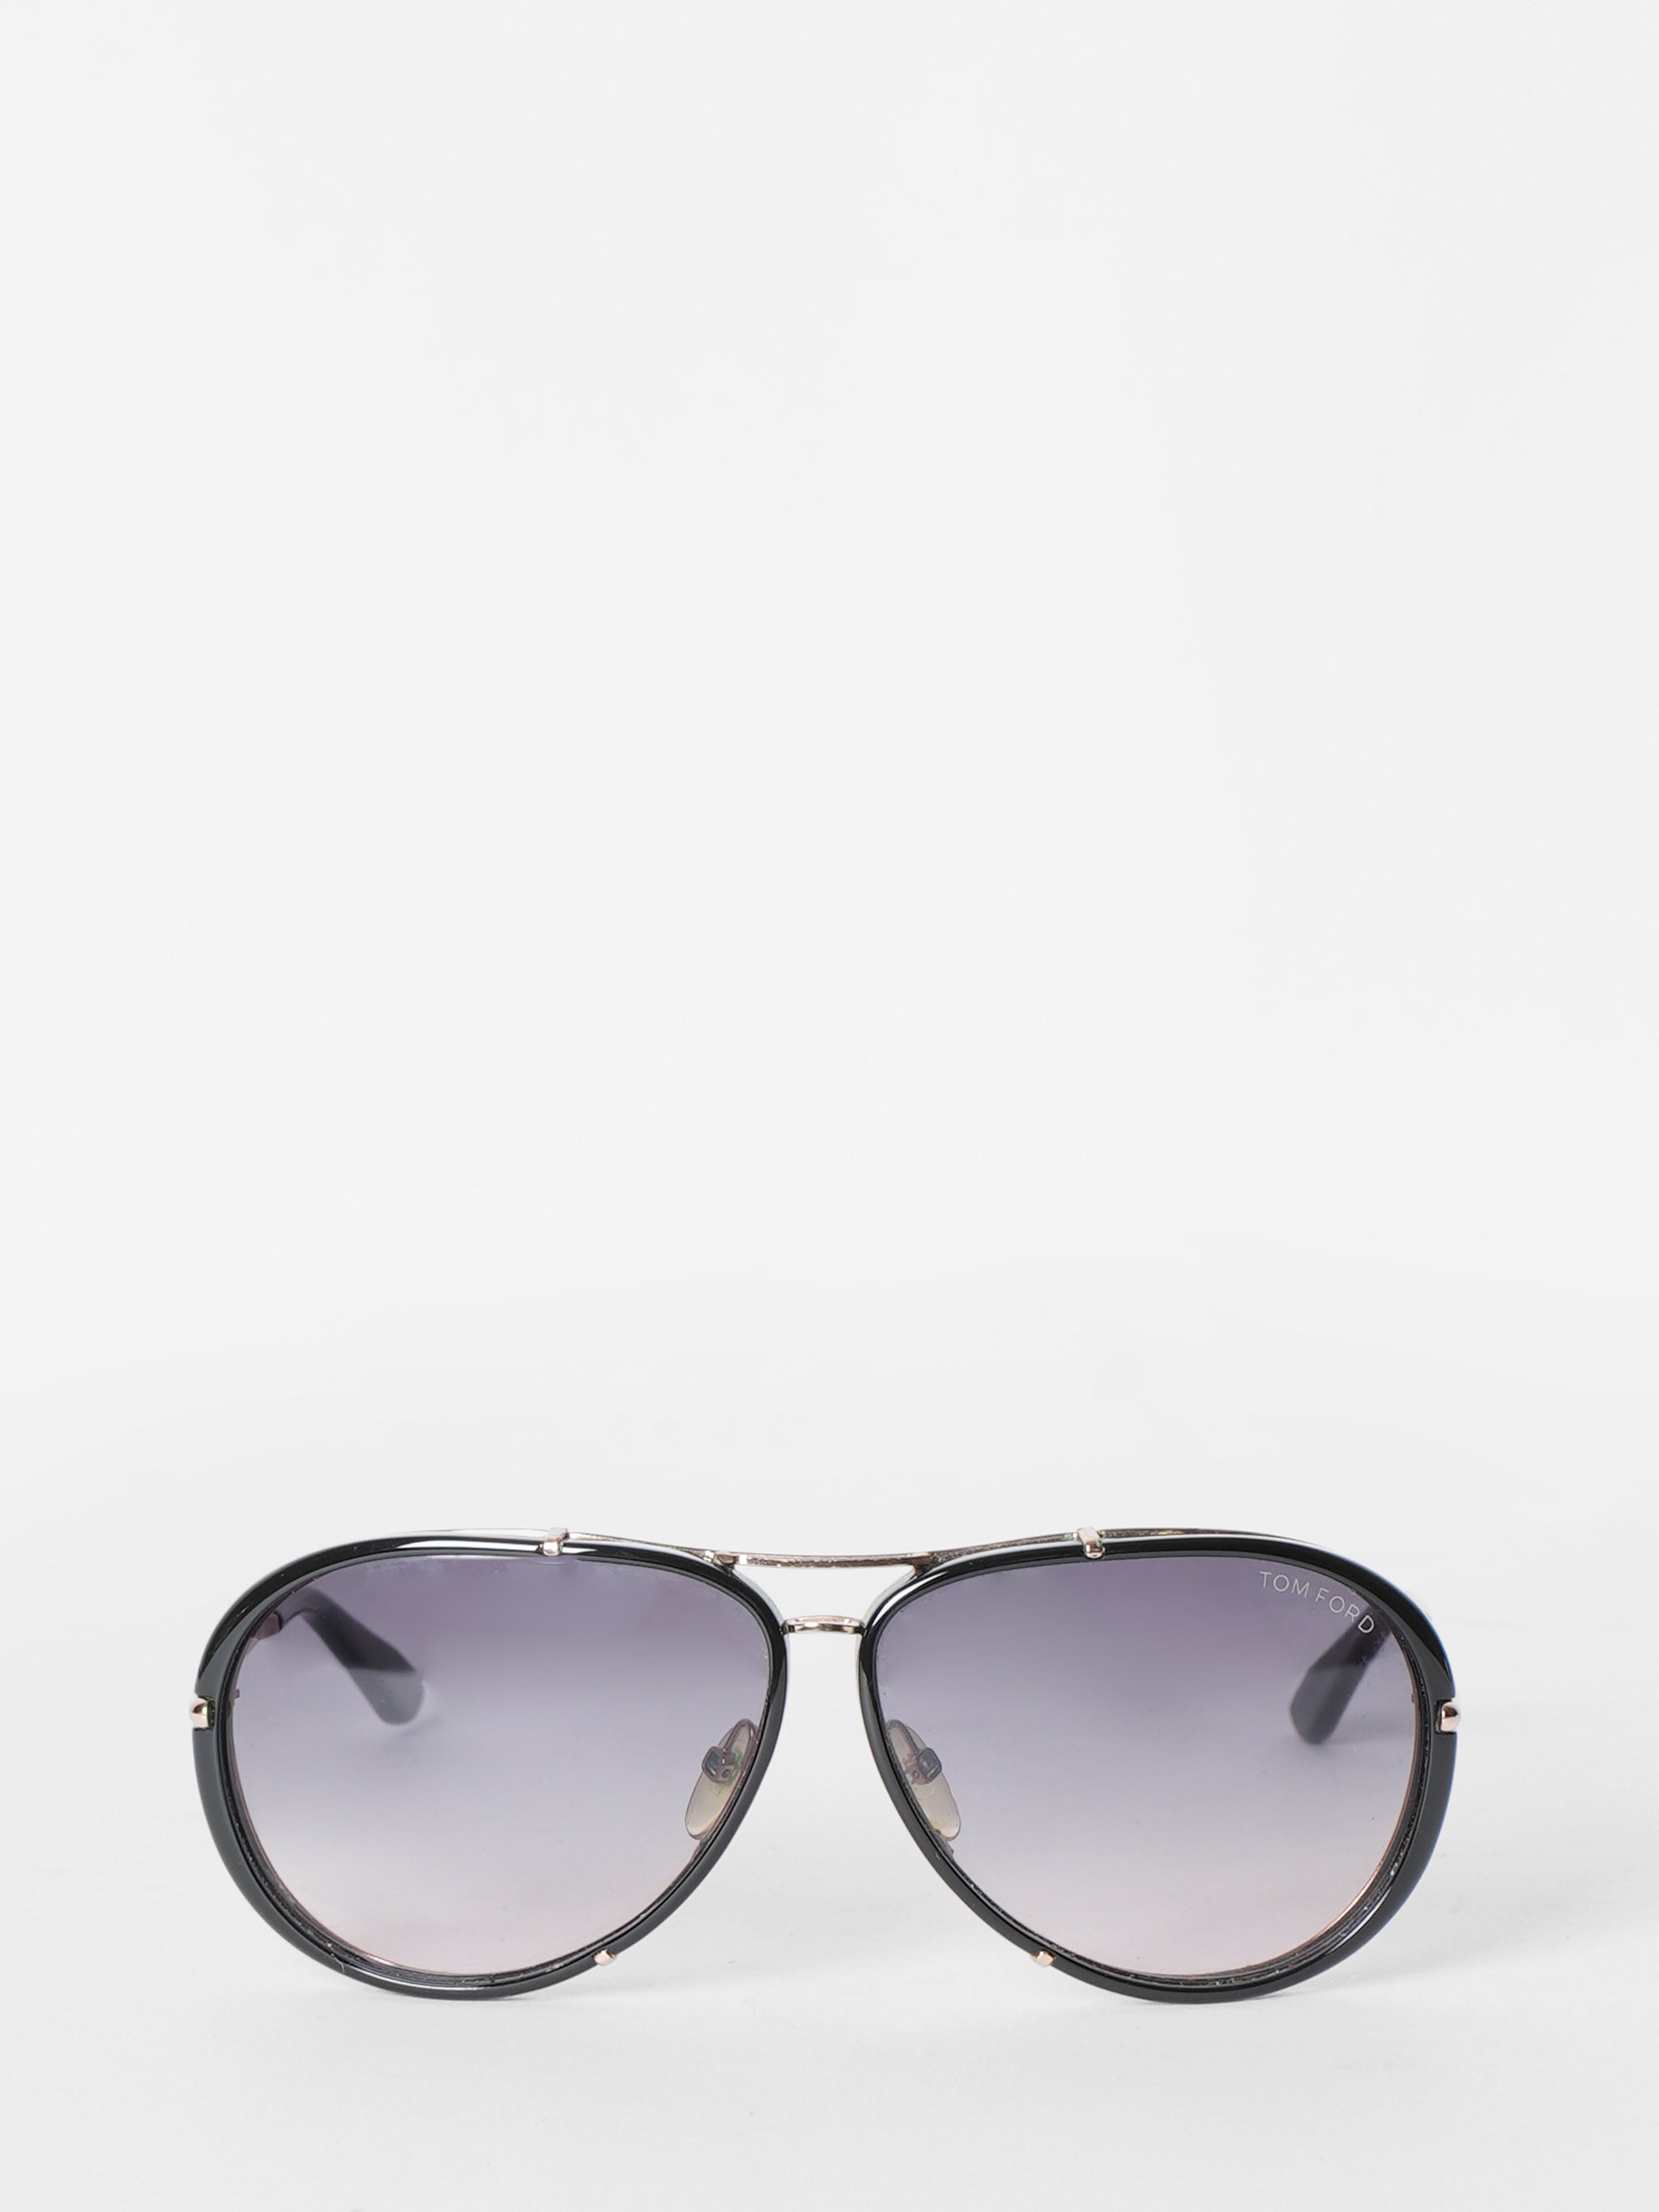 Tomford Black Sunglass With Golden Frame